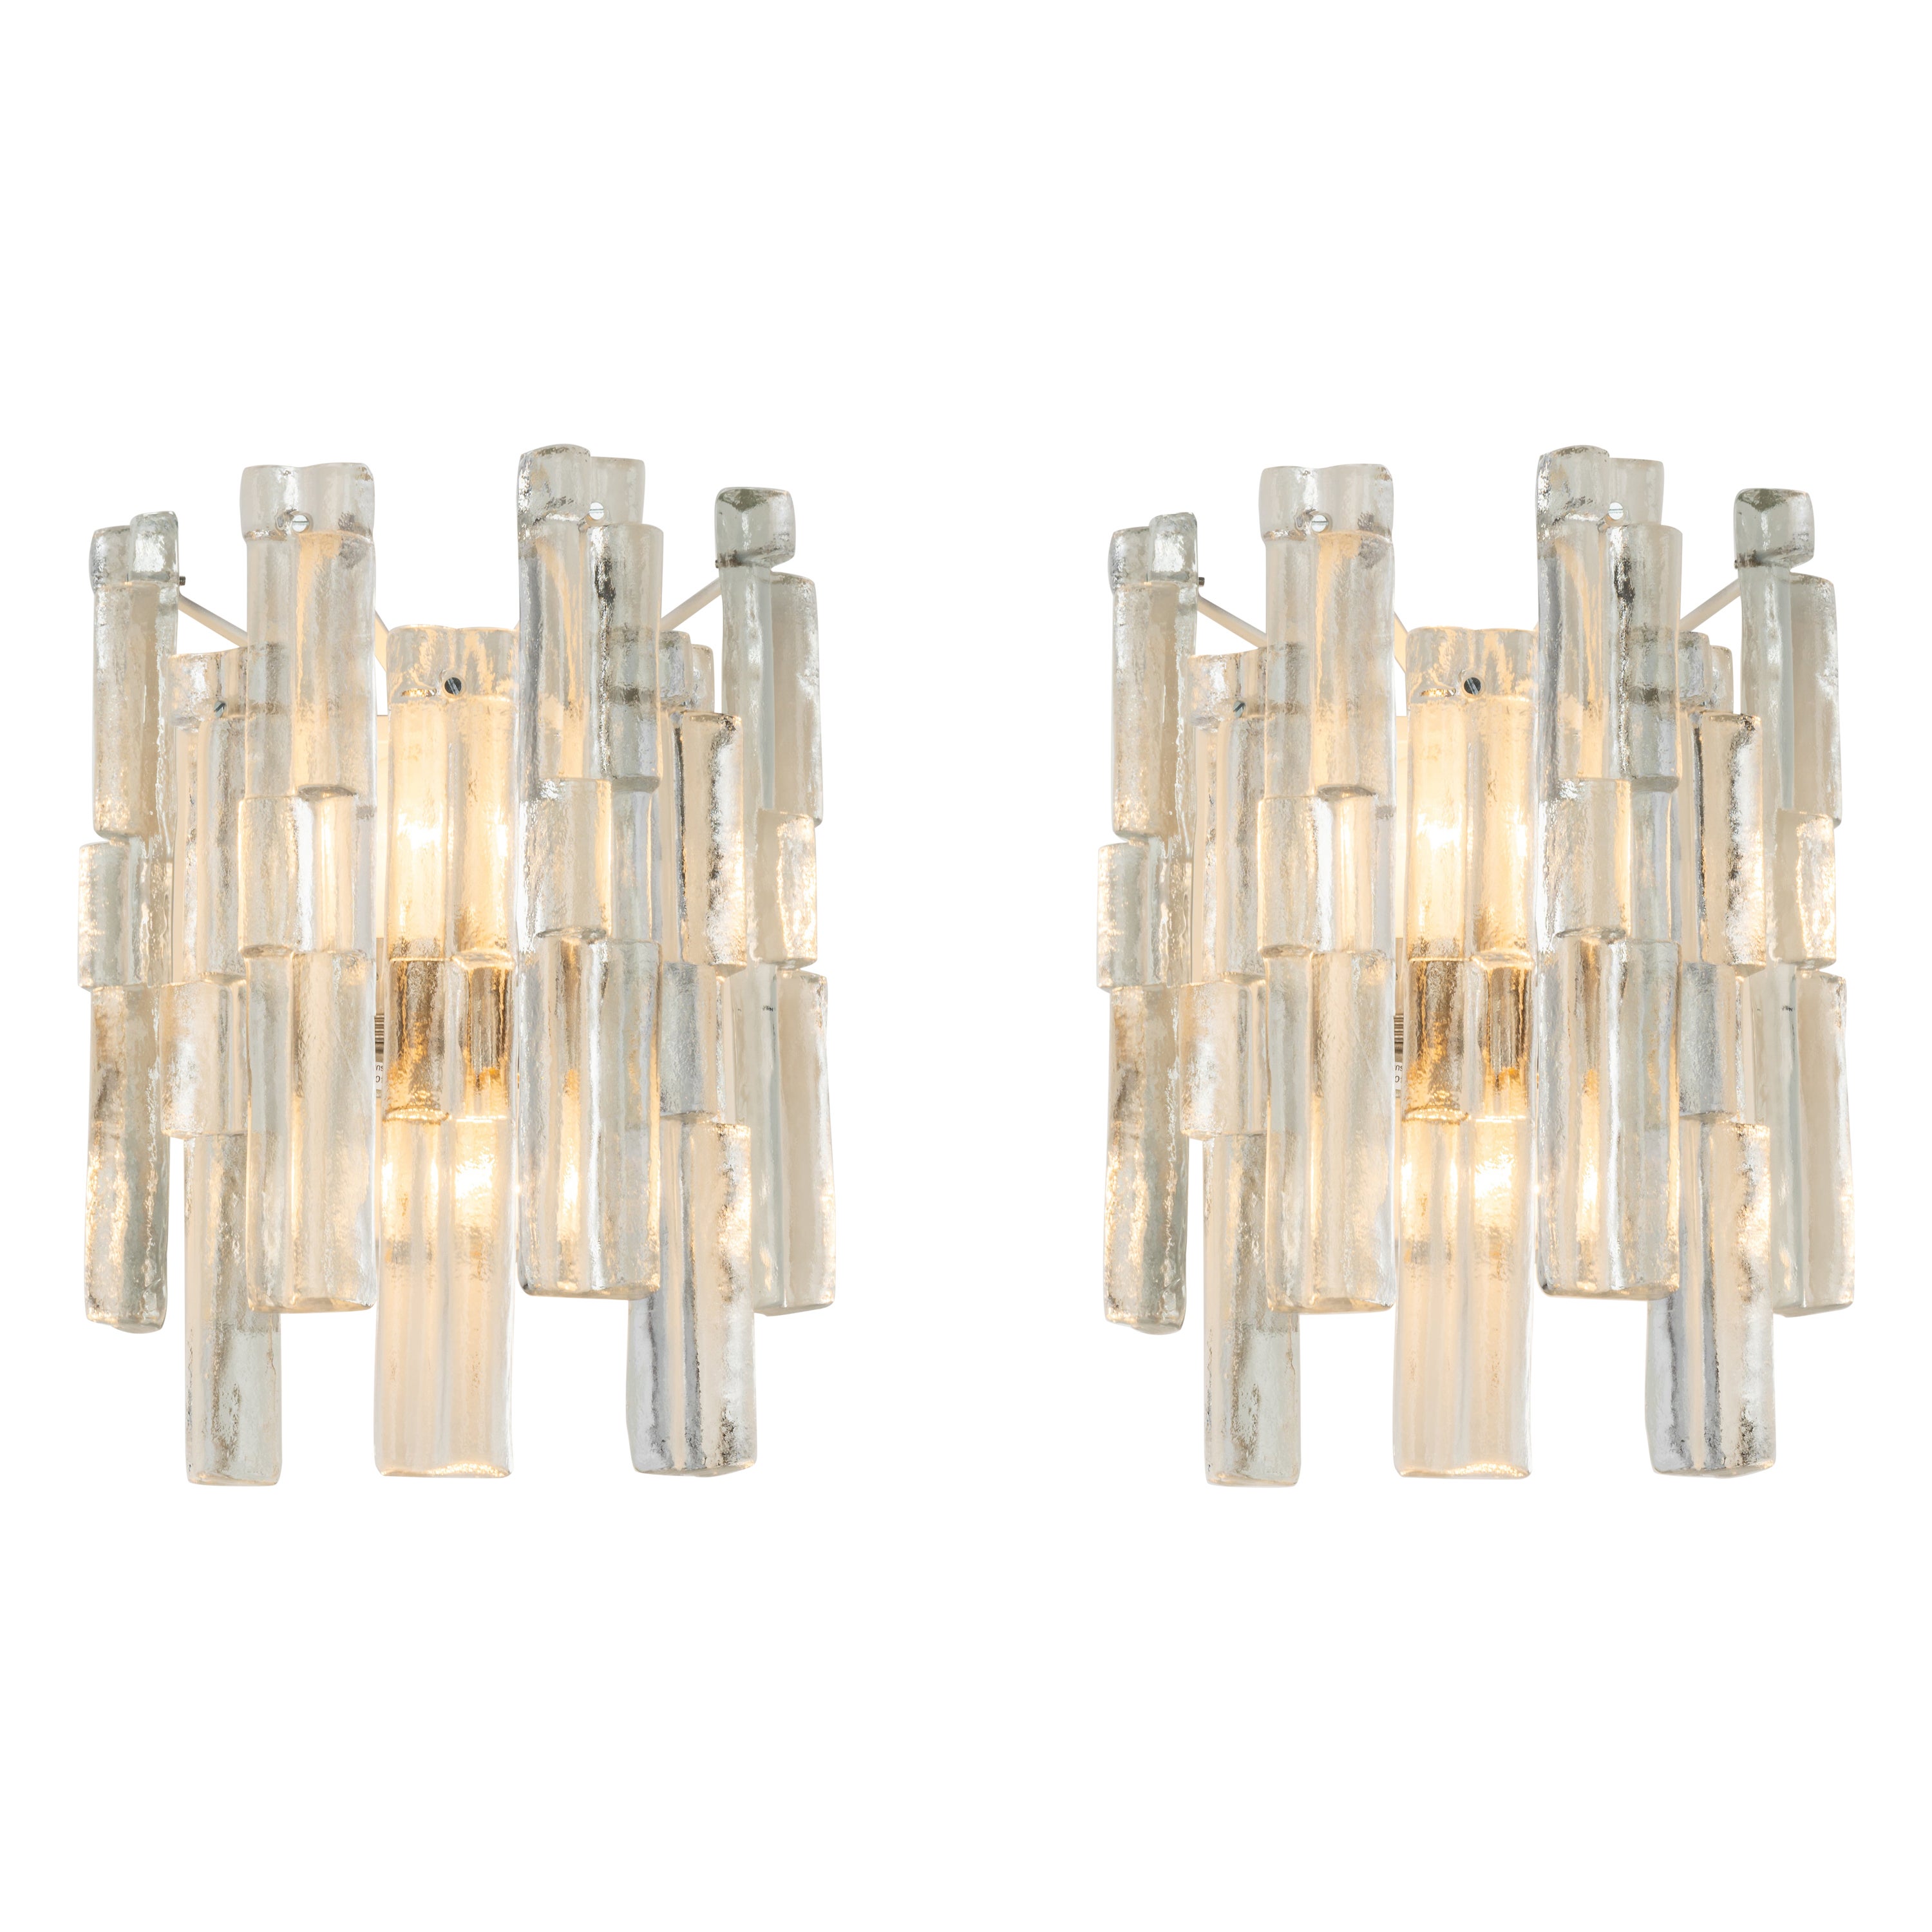 Pair of Stunning Large Kalmar Sconces Wall Lights, Austria, 1960s For Sale